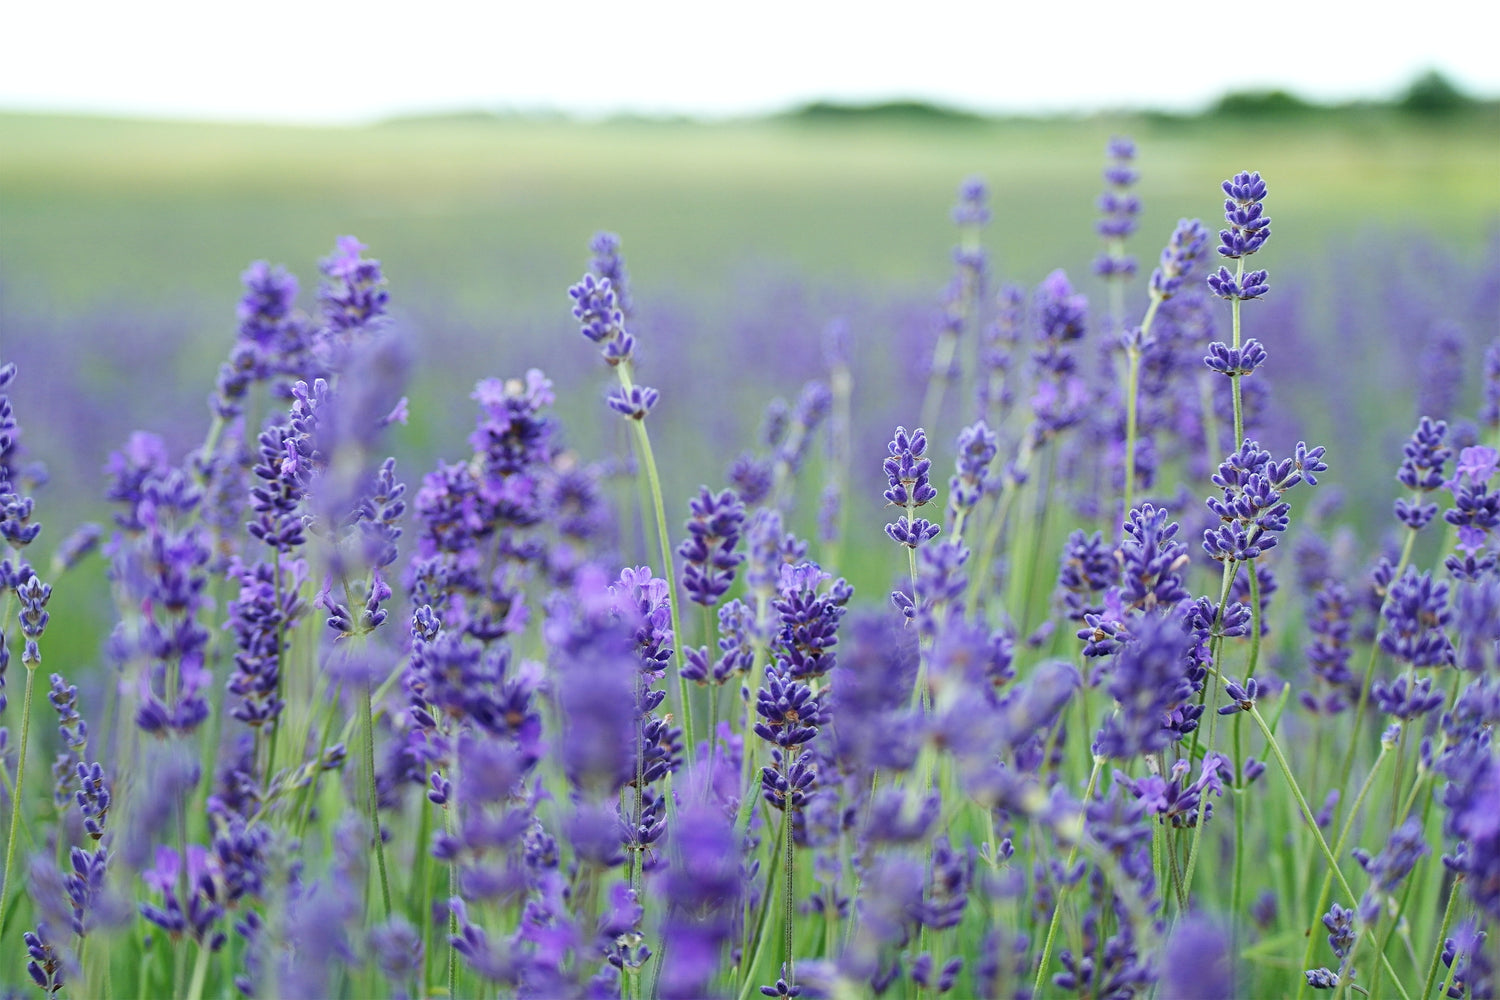 Lavender field in full bloom at Sacred Plant Co's Low Water Regenerative Colorado Farm. Rows of vibrant purple flowers extend across the landscape, showcasing the farm's commitment to sustainable farming practices